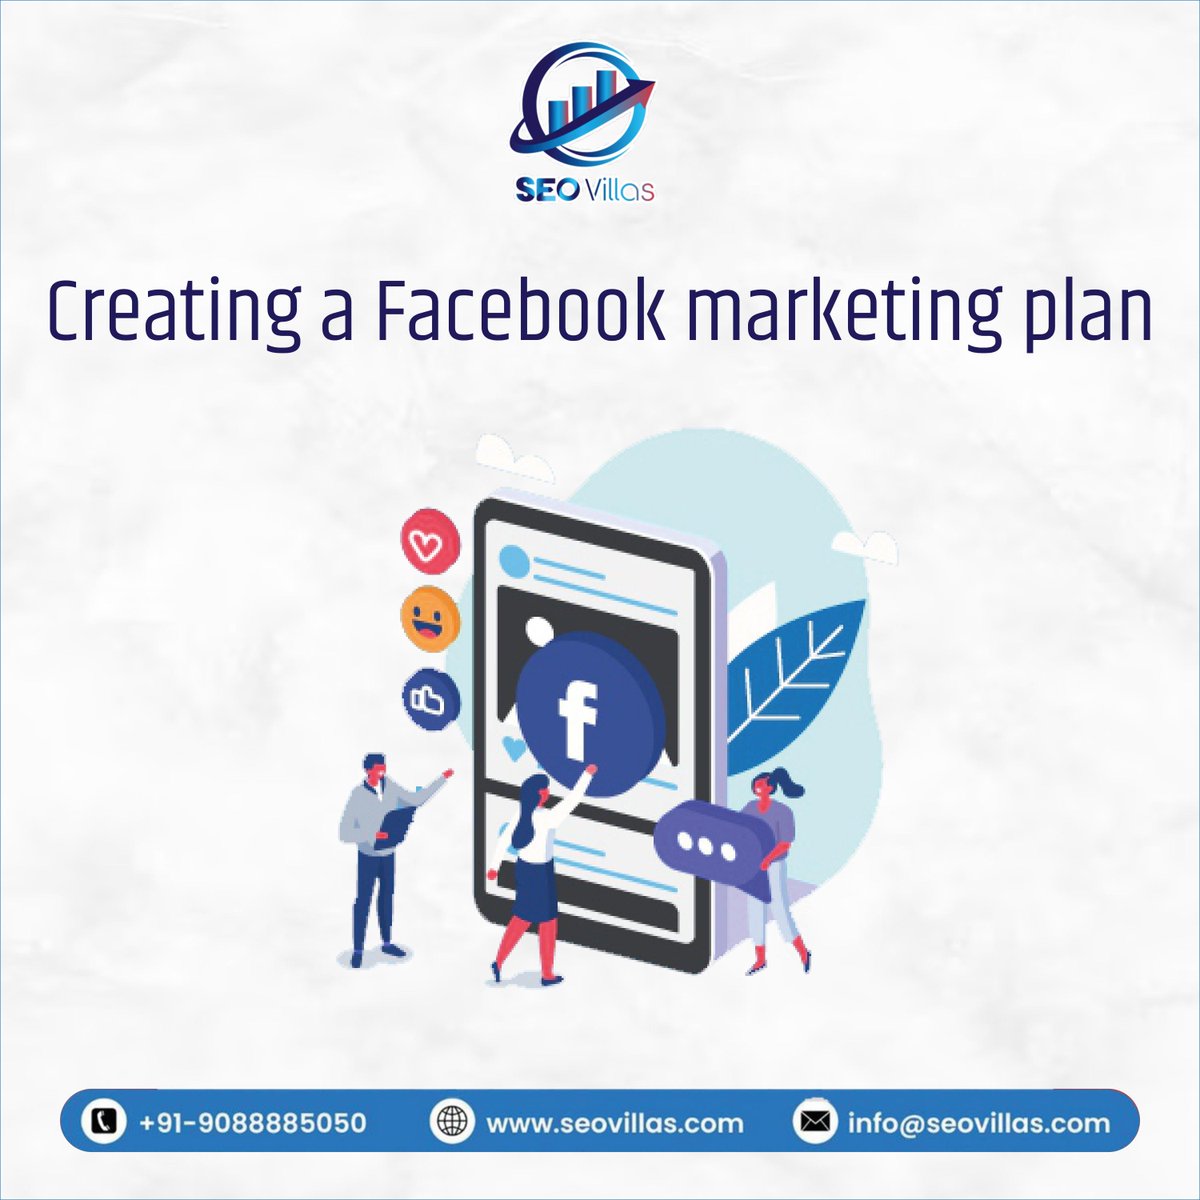 Attention all marketers & business owners! 📣 Unlock the full potential of Facebook with a well-crafted marketing plan. 🚀
👉Learn the art of targeting.
👉 #Engagingcontent
👉 Effective ad campaigns to reach your audience & drive results. 💼

#FacebookMarketing #MarketingStrategy